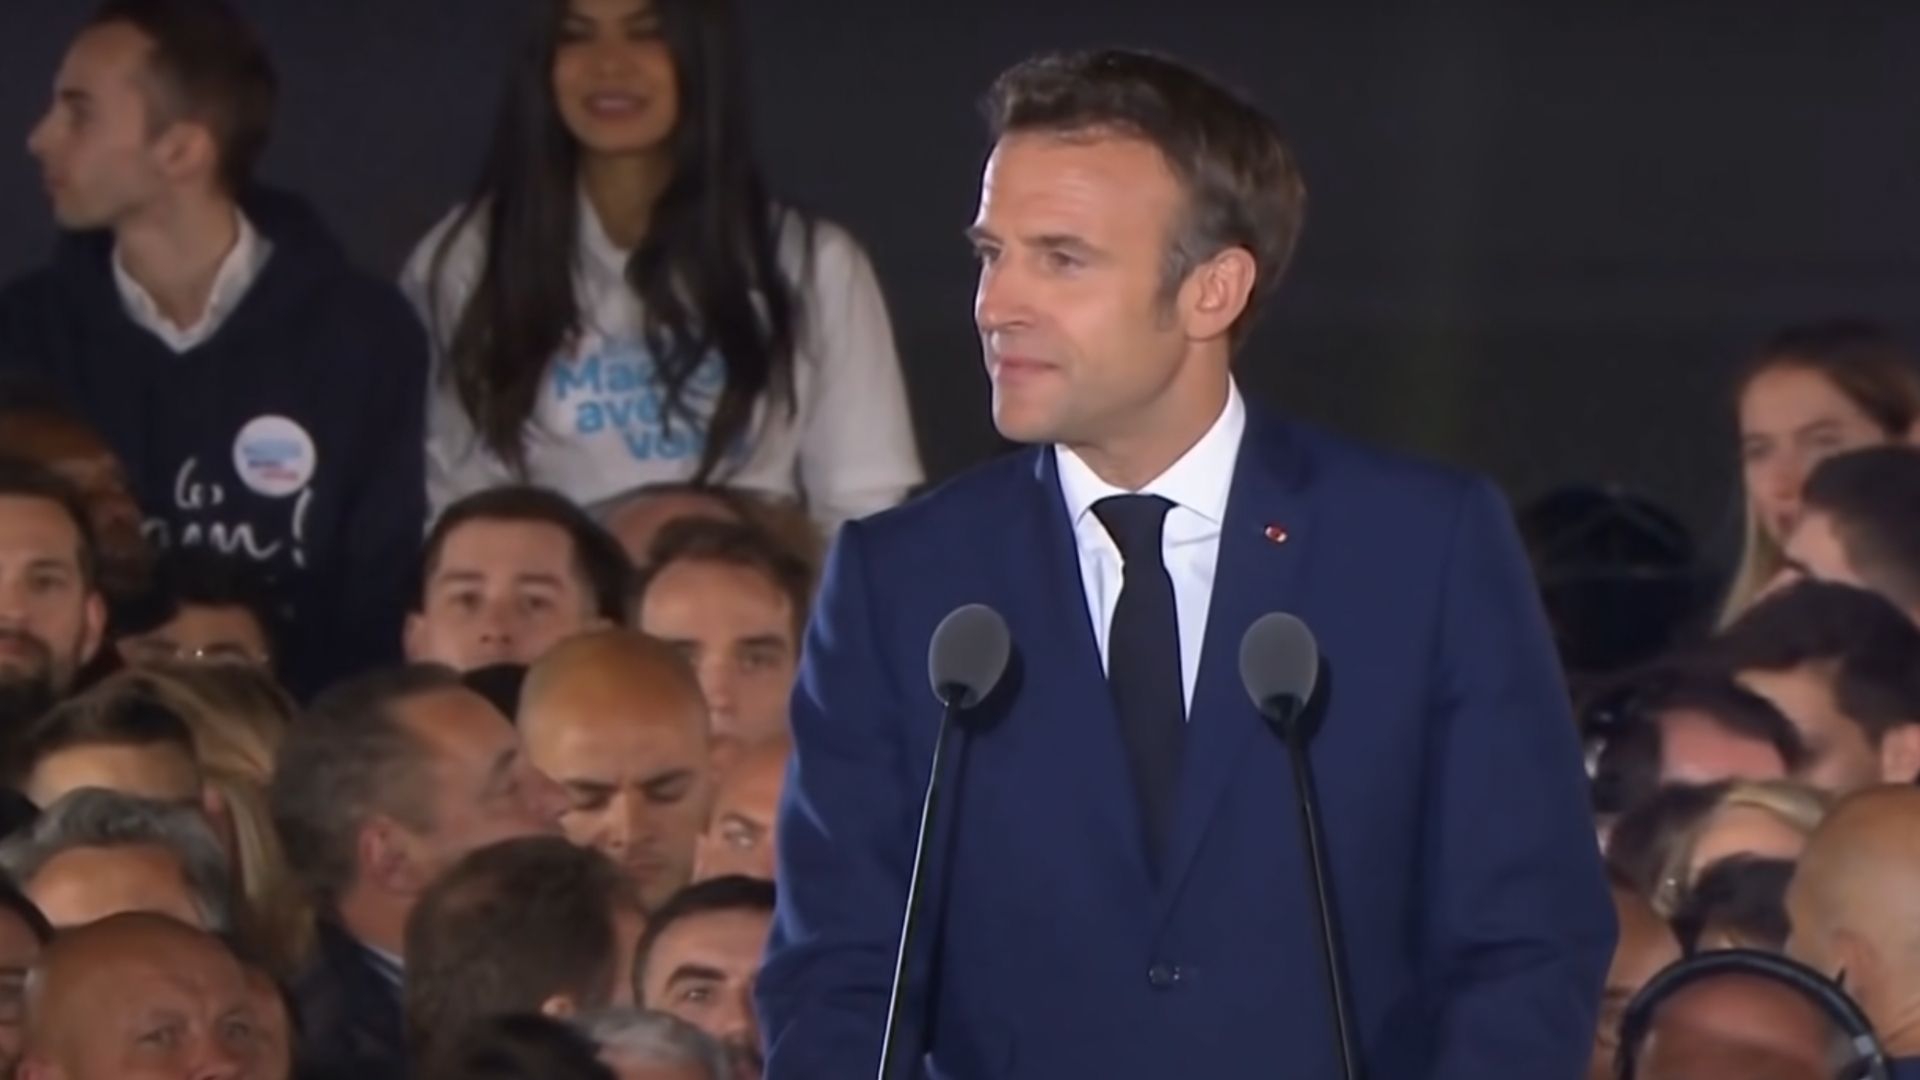 macron discours 24 avril 2022 reelection